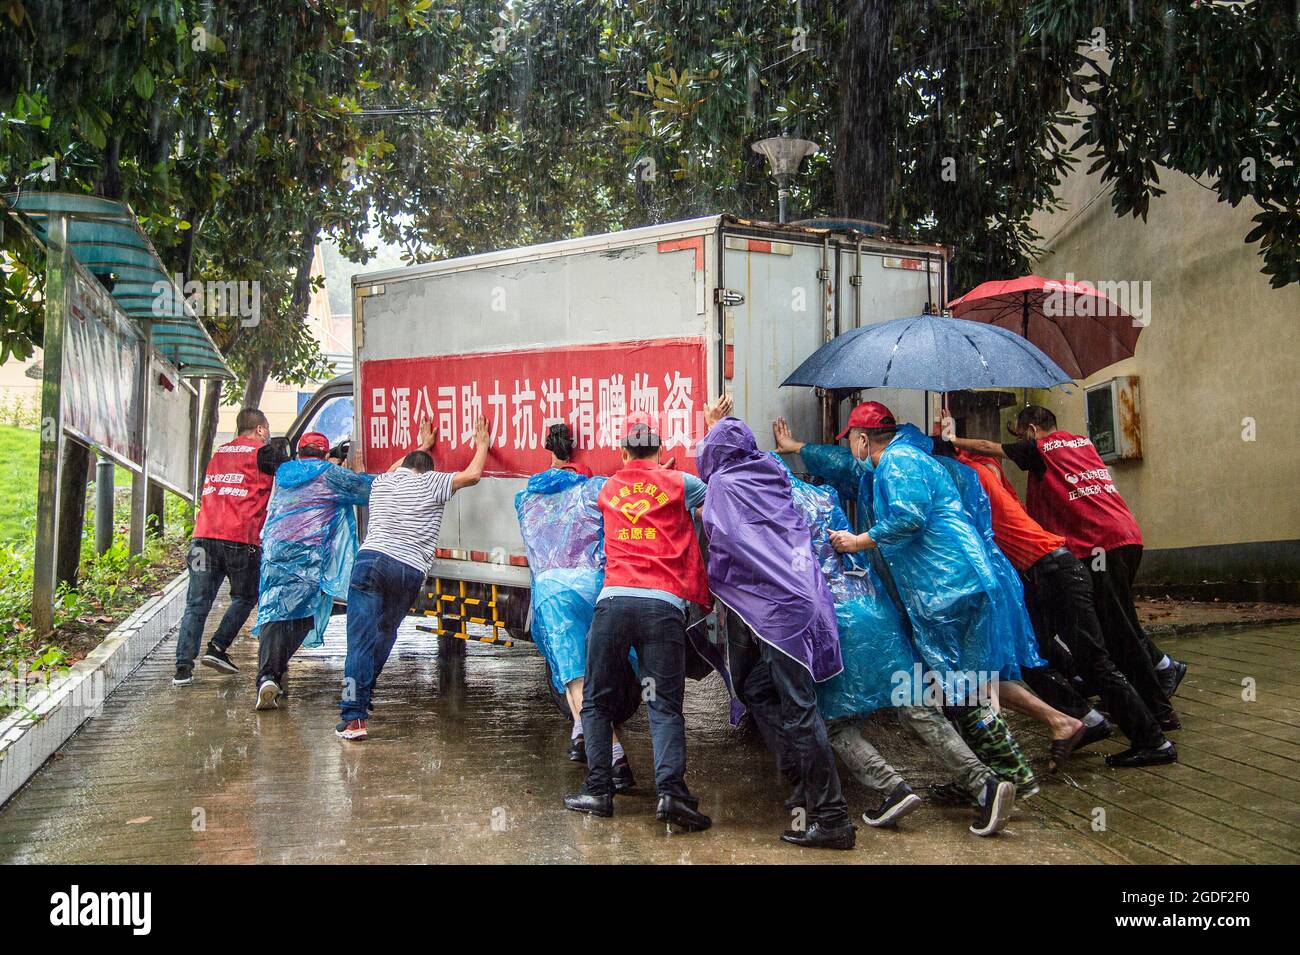 SUIZHOU, Aug. 13, 2021 (Xinhua) -- Staff members push a van loaded with disaster-relief supplies in Liulin Township of Suixian County, central China's Hubei Province, Aug. 13, 2021. Twenty-one people were killed and four others missing as heavy rain lashed Liulin Township from Wednesday to Thursday, local authorities said Friday. The Liulin Township saw total precipitation reaching 503 mm from 9 p.m. Wednesday to 9 a.m. Thursday, causing an average waterlogging depth of 3.5 meters, the county said in an announcement. Over 8,000 people have been affected in the township, acco Credit: Xinhua/Ala Stock Photo